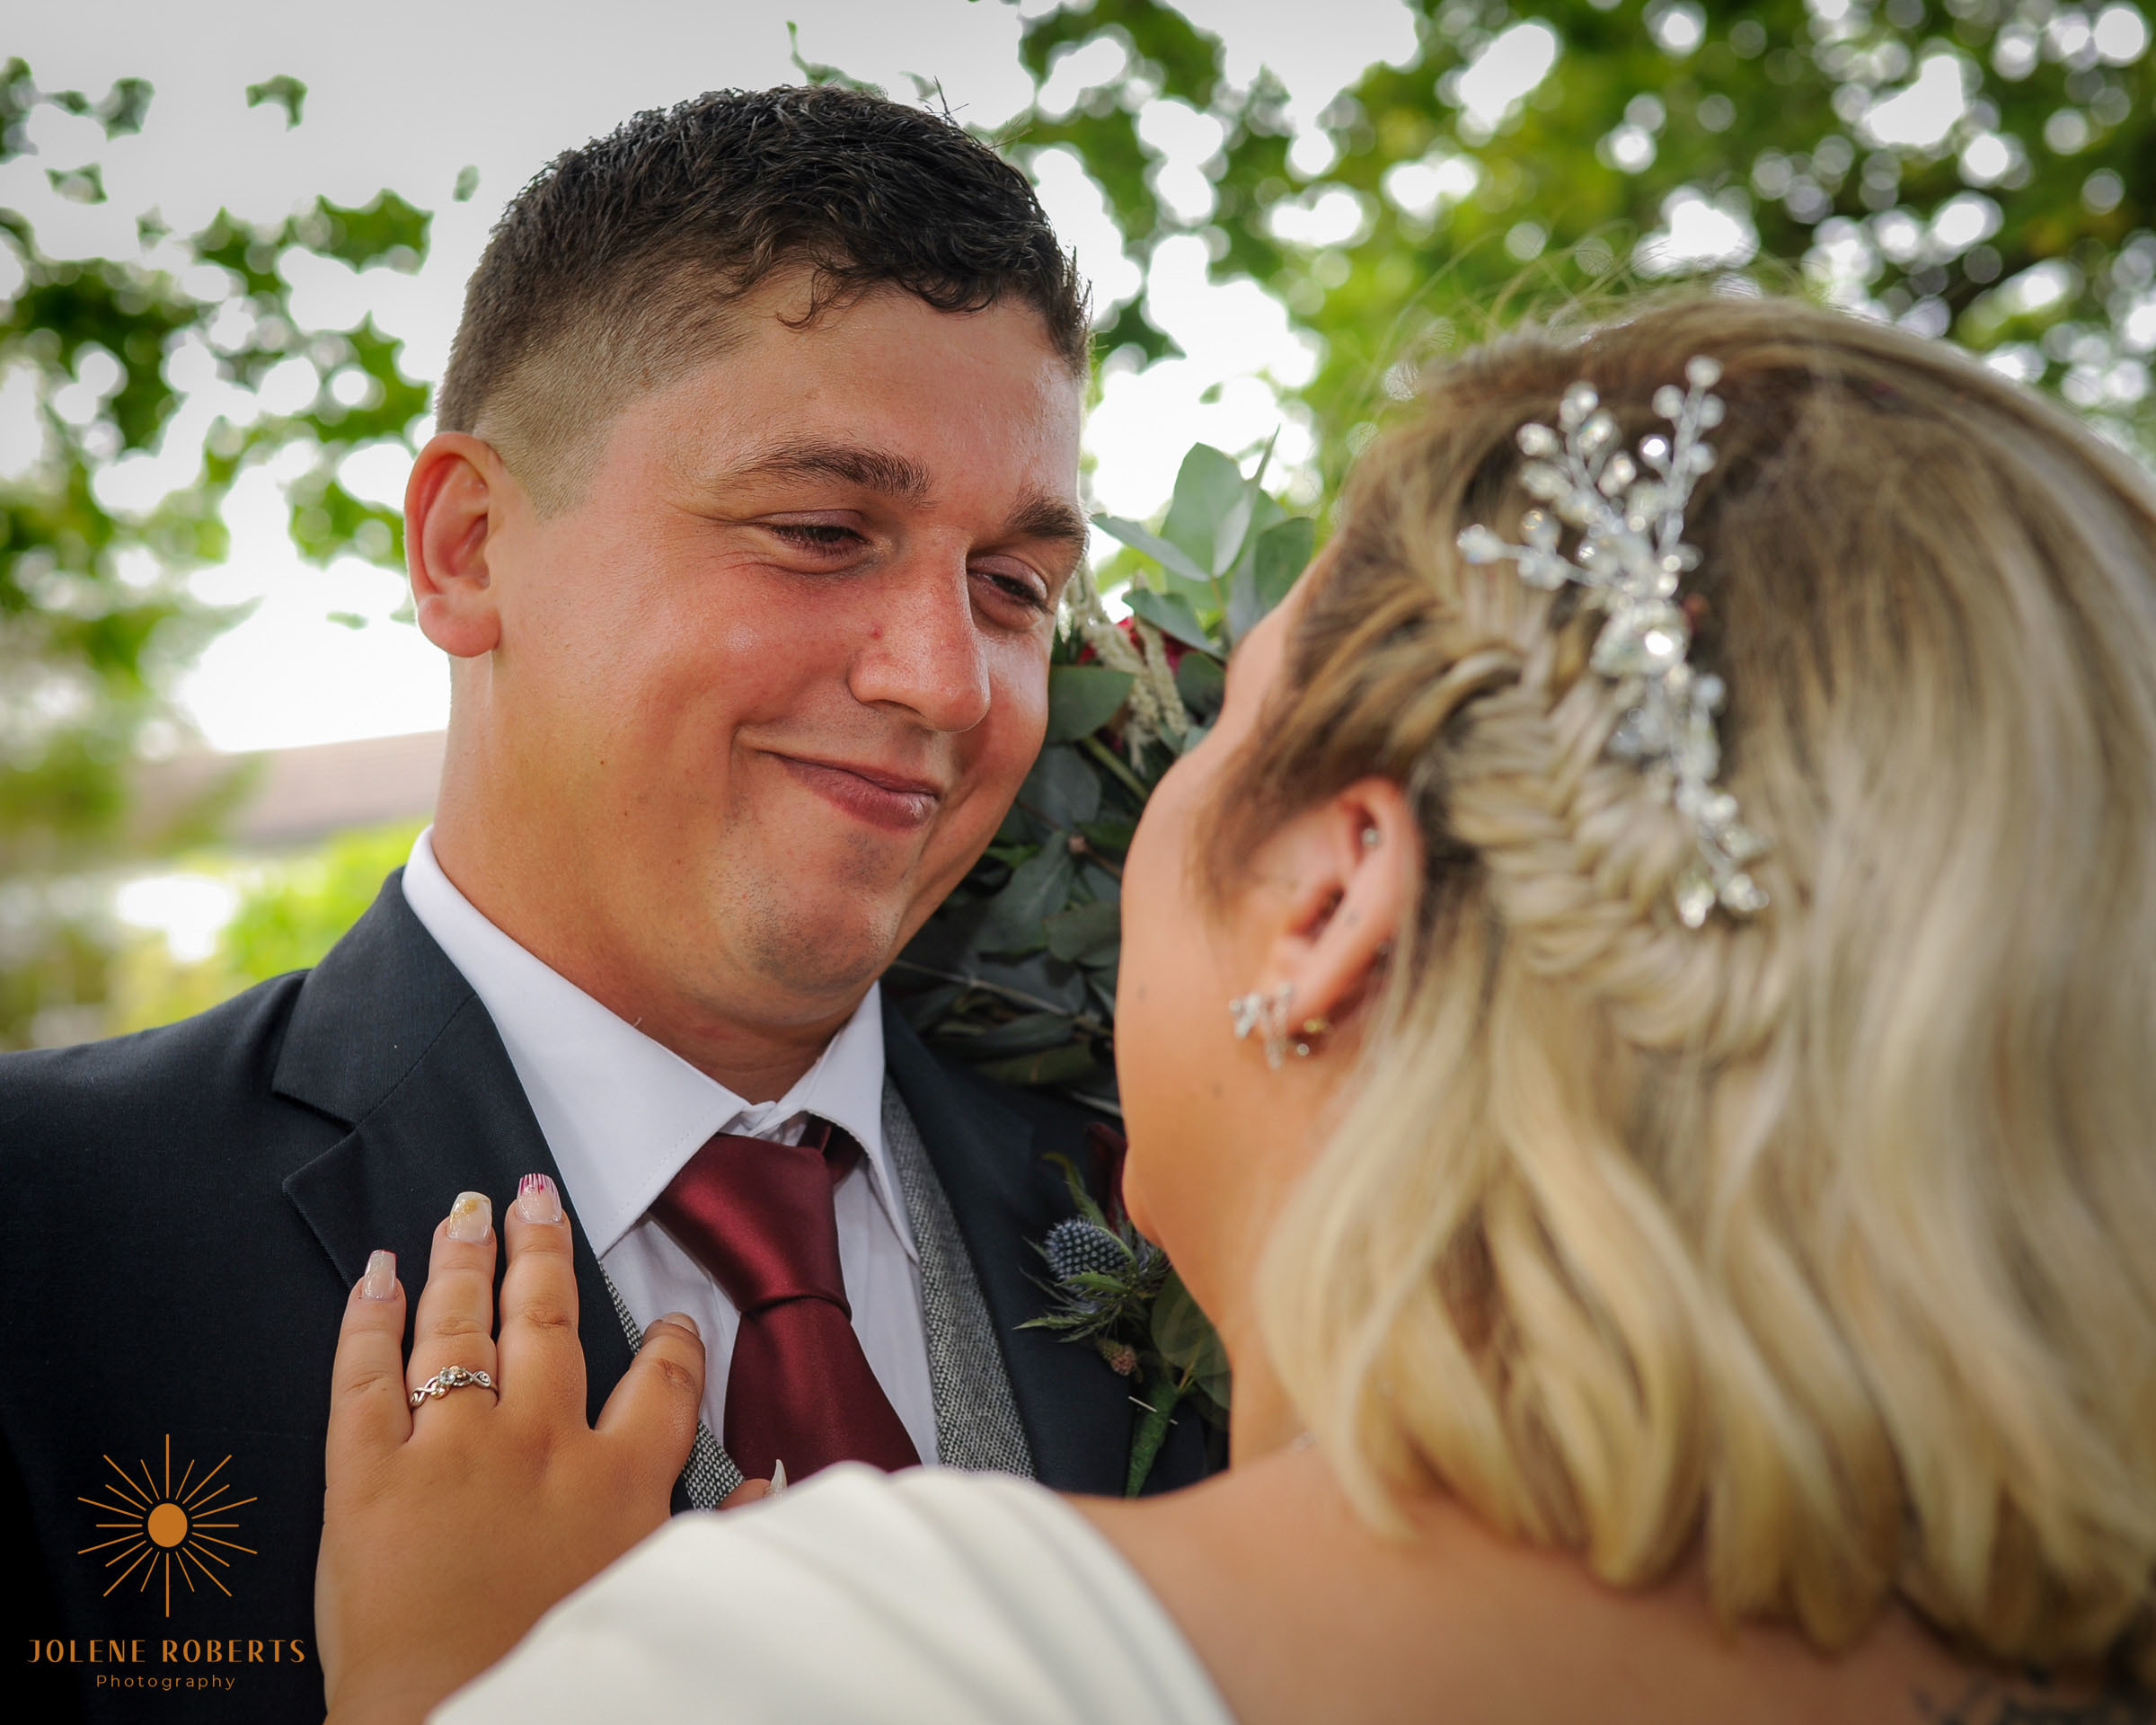 Tania and Connor Rowlands. Picture: Jolene Roberts of Wedding Photography by Jolene